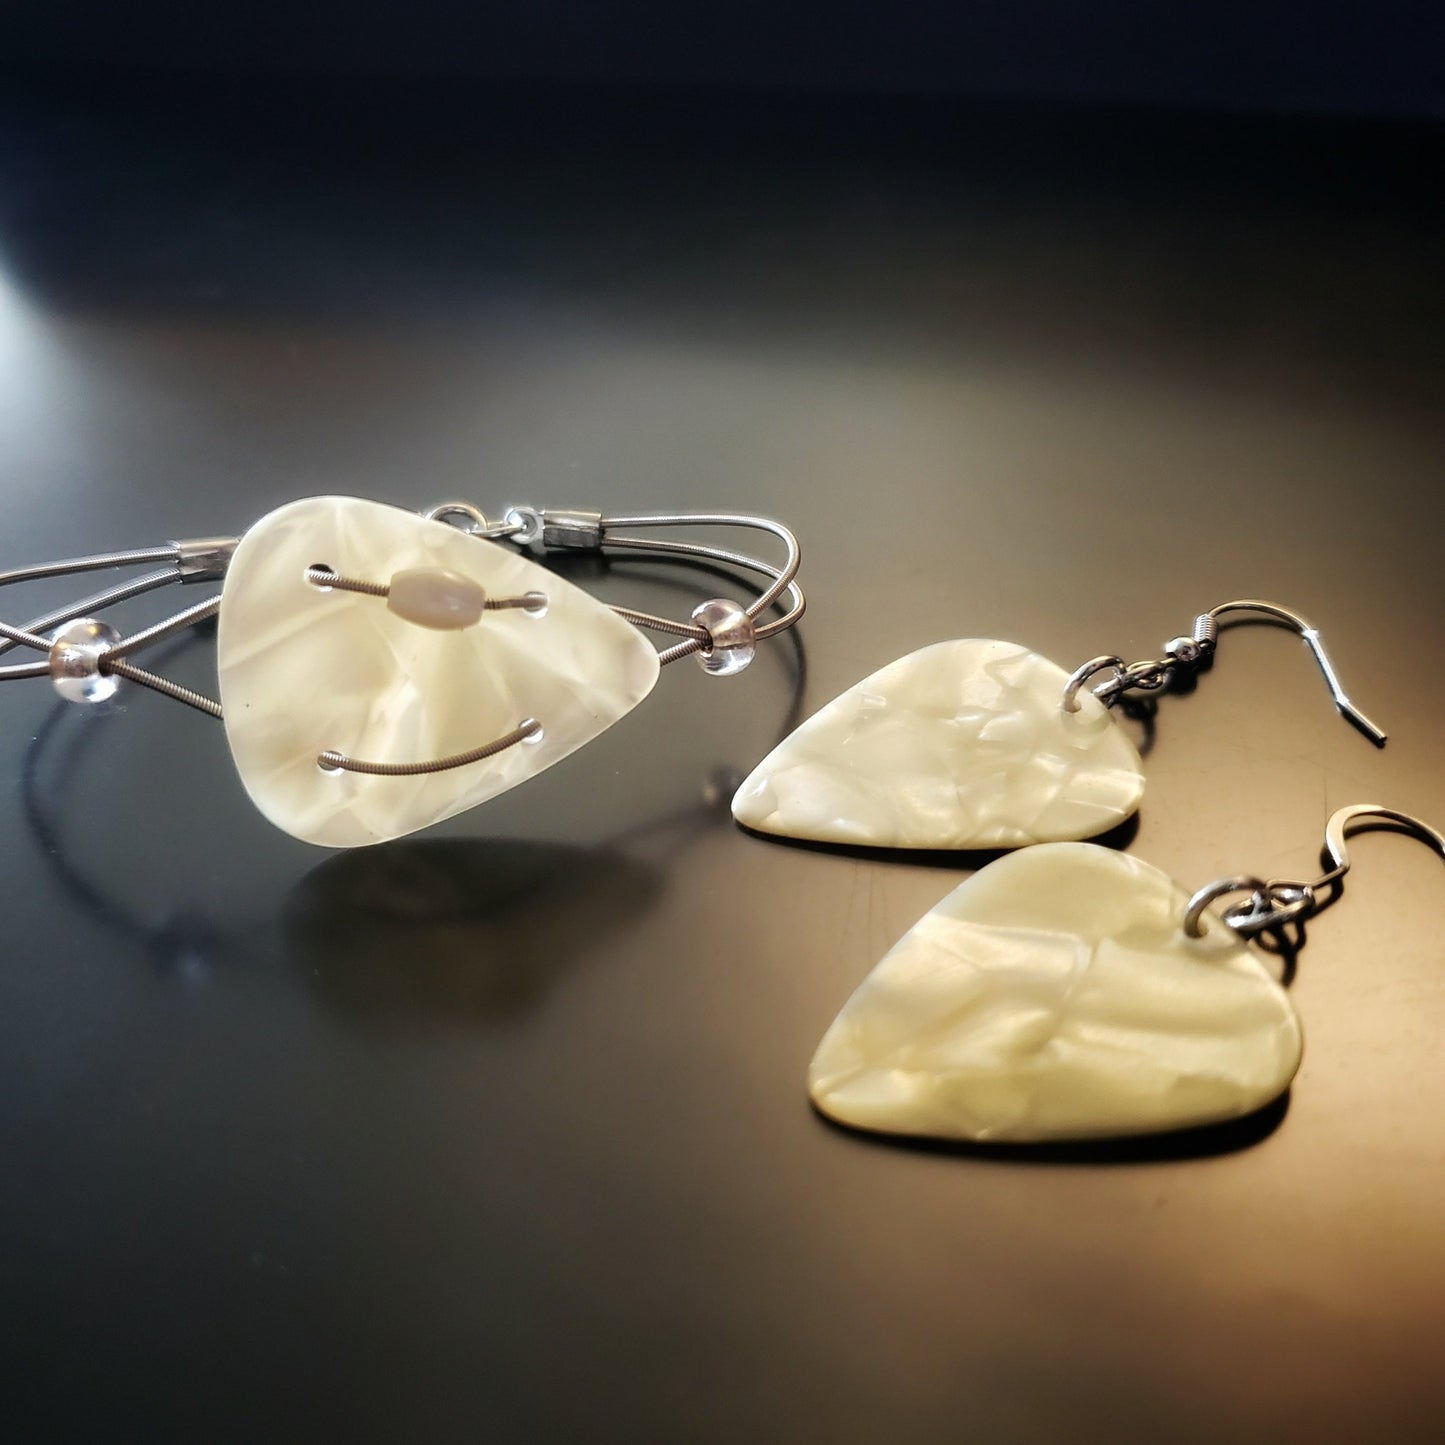 jewelry set - bracelet is made from upcycled guitar strings and a beautiful pearly off-white guitar pick. The earrings are made from matching plectrums (guitar picks)